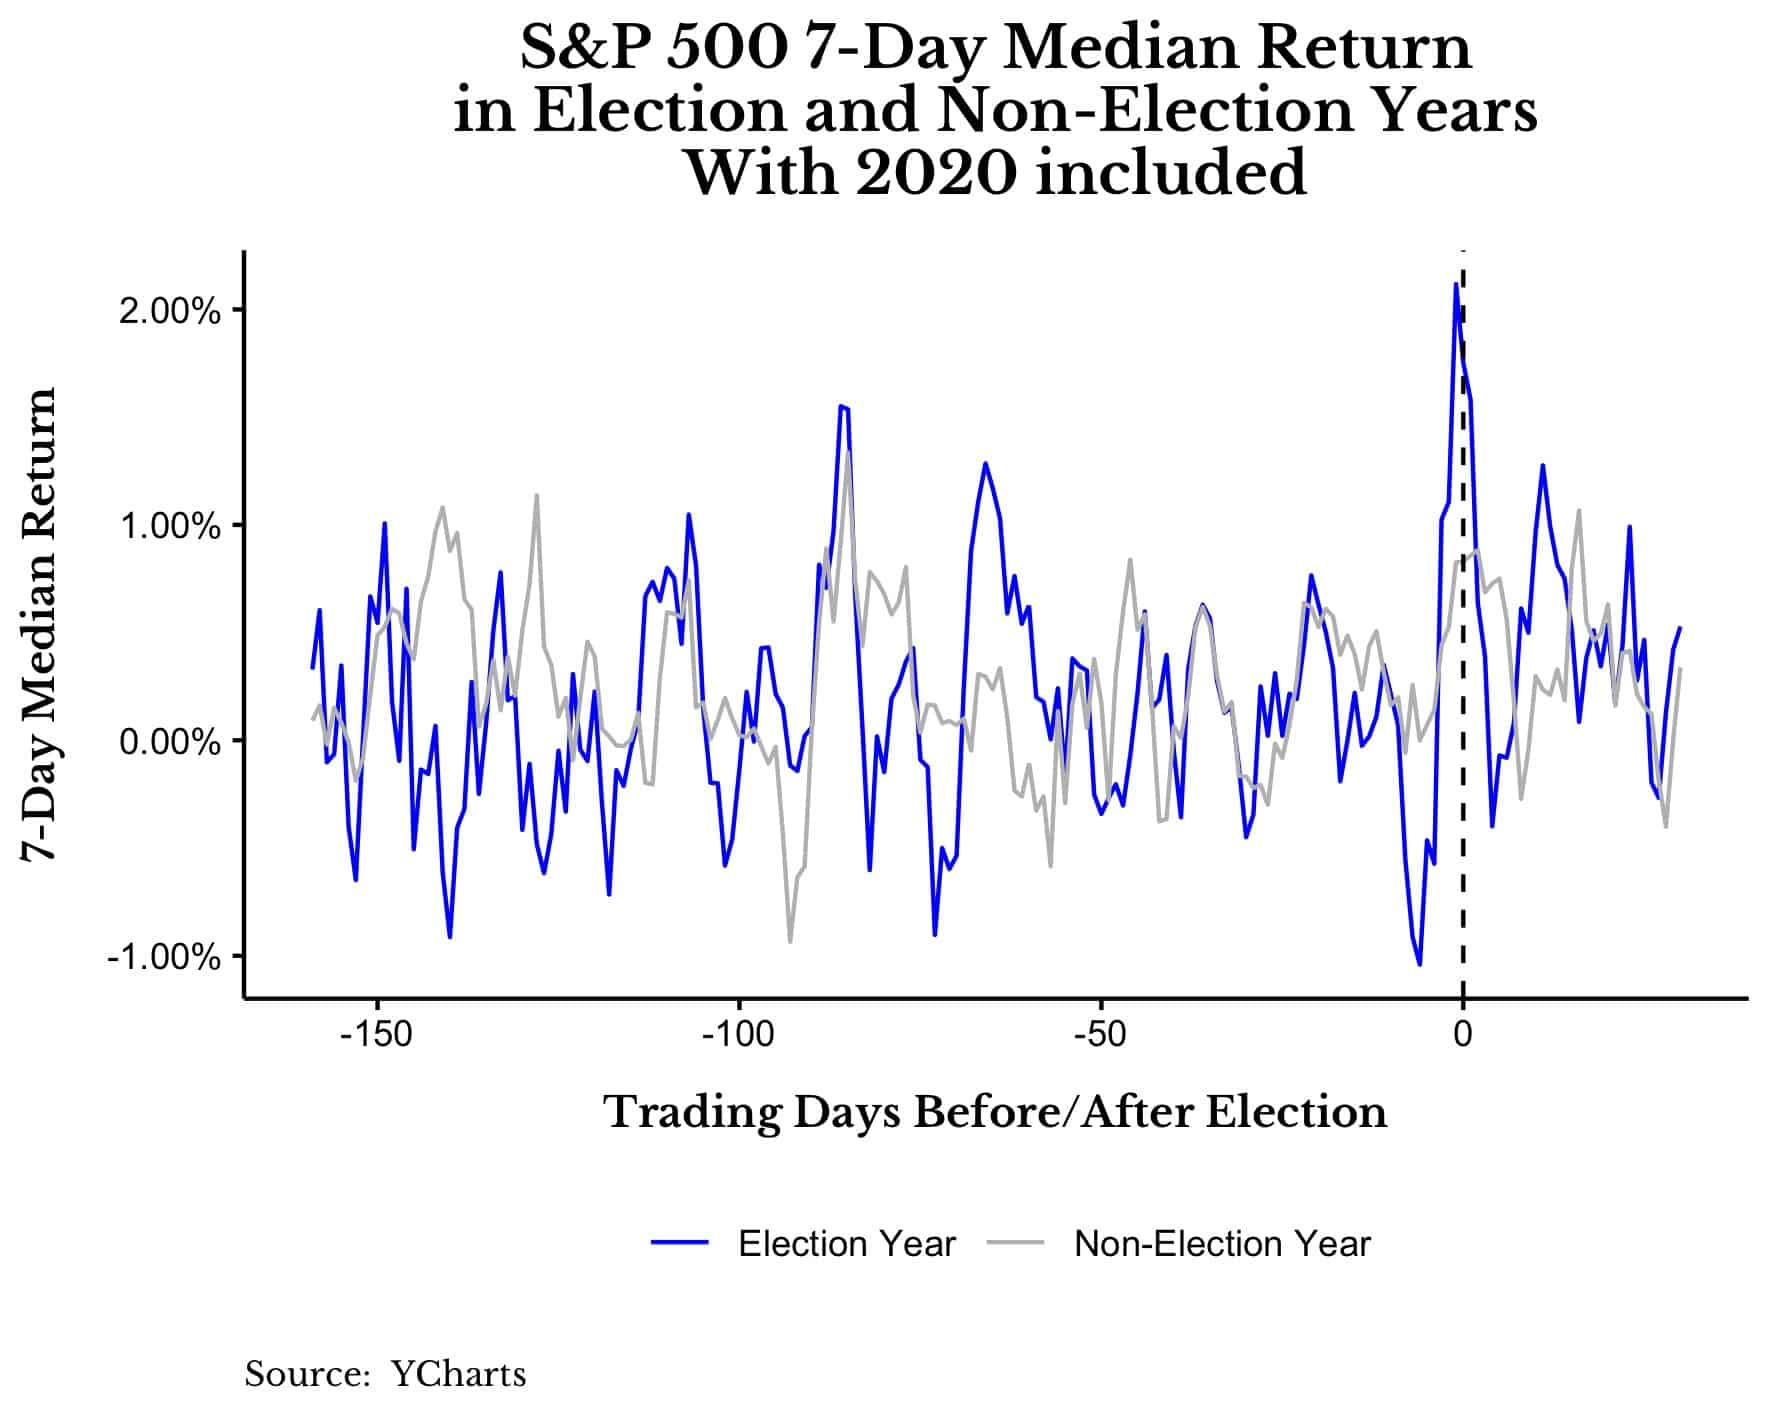 S&P 500 7-day median return in election and non-election years with 2020 included